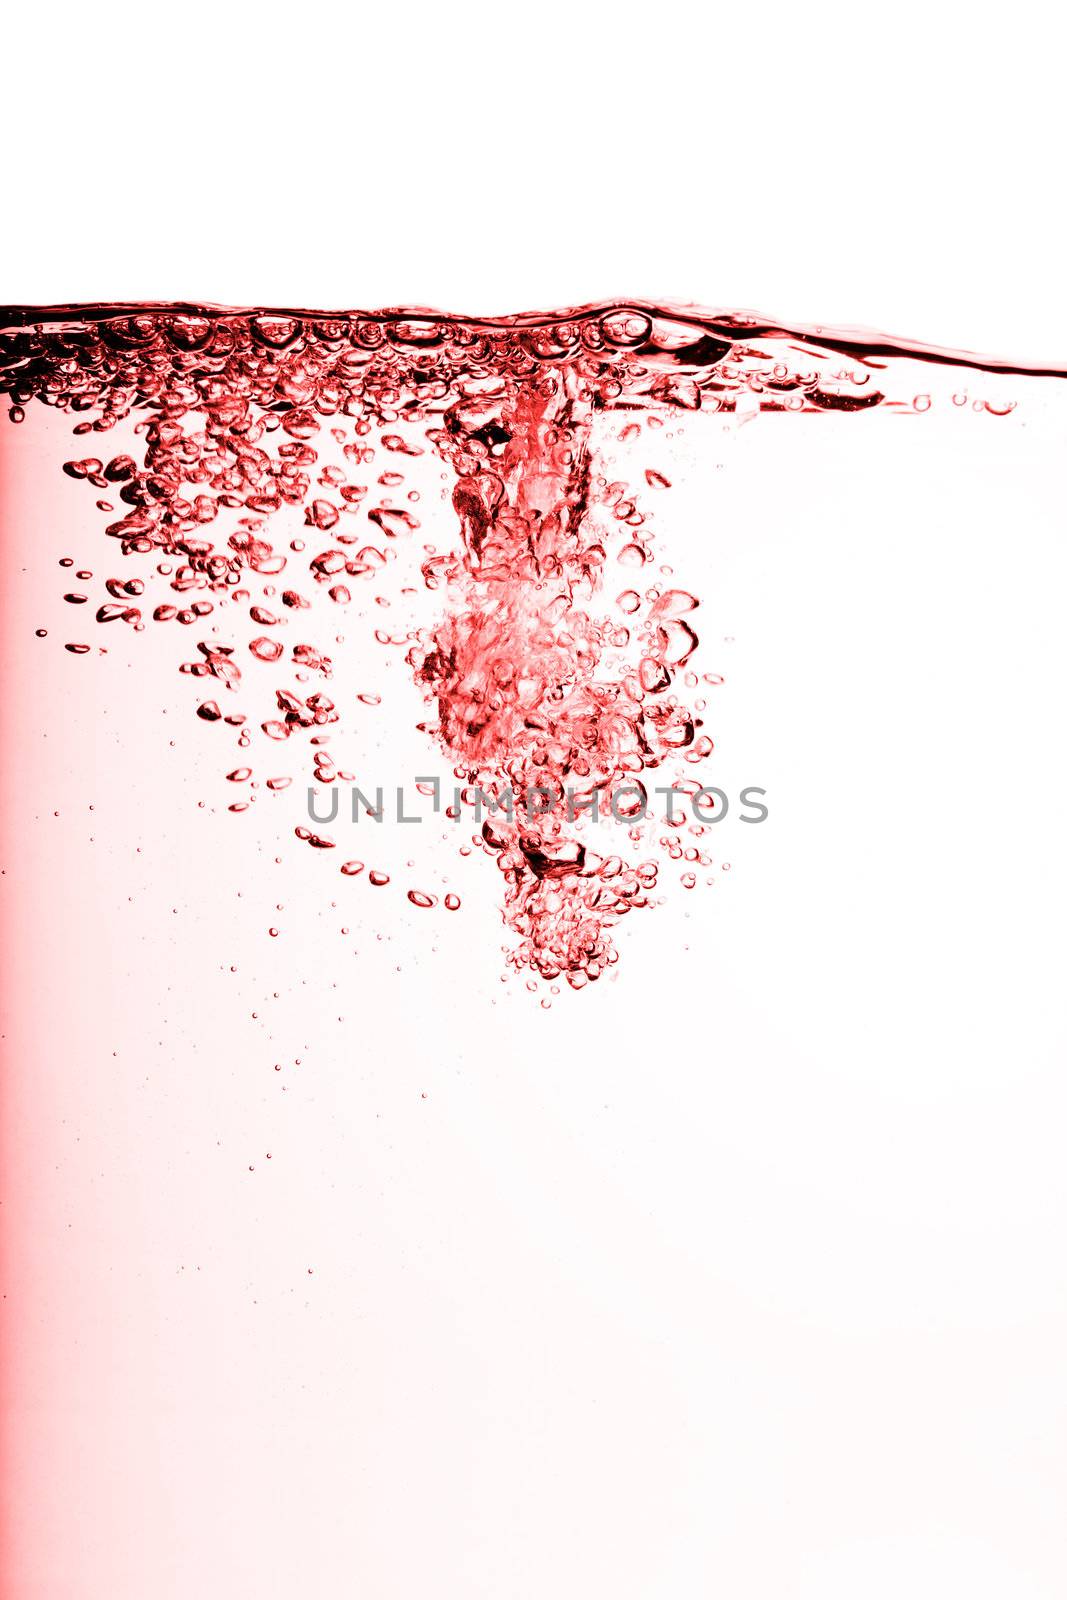 Red Water  by leaf